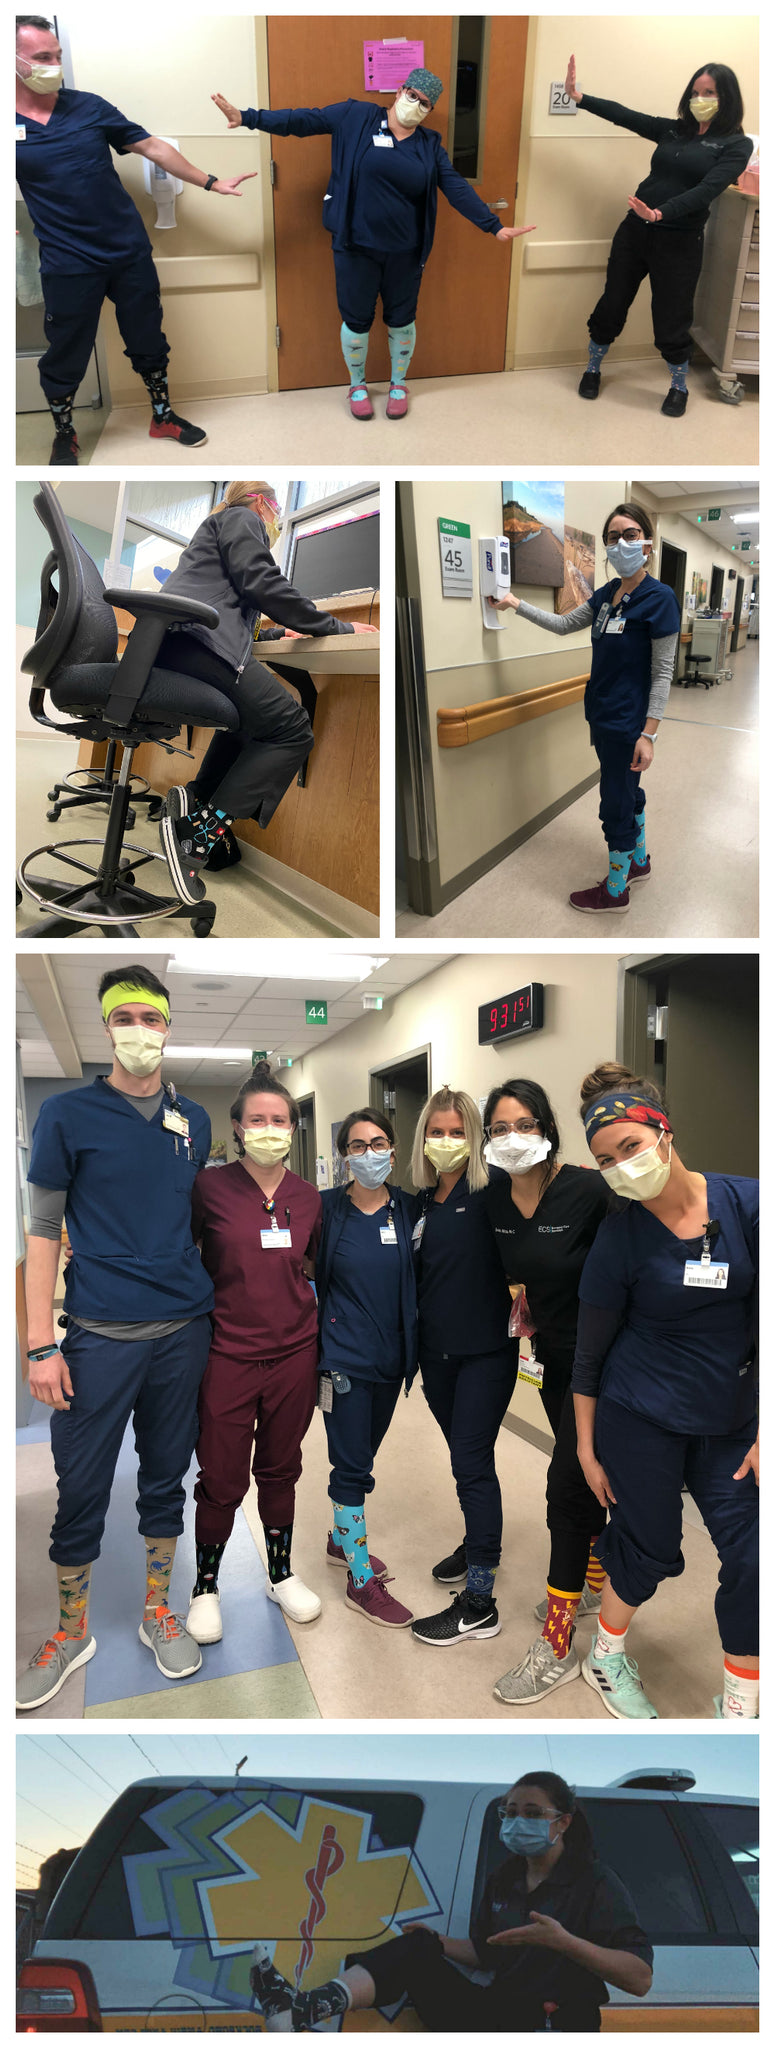 Medical workers wearing fun novelty socks while working at a hospital